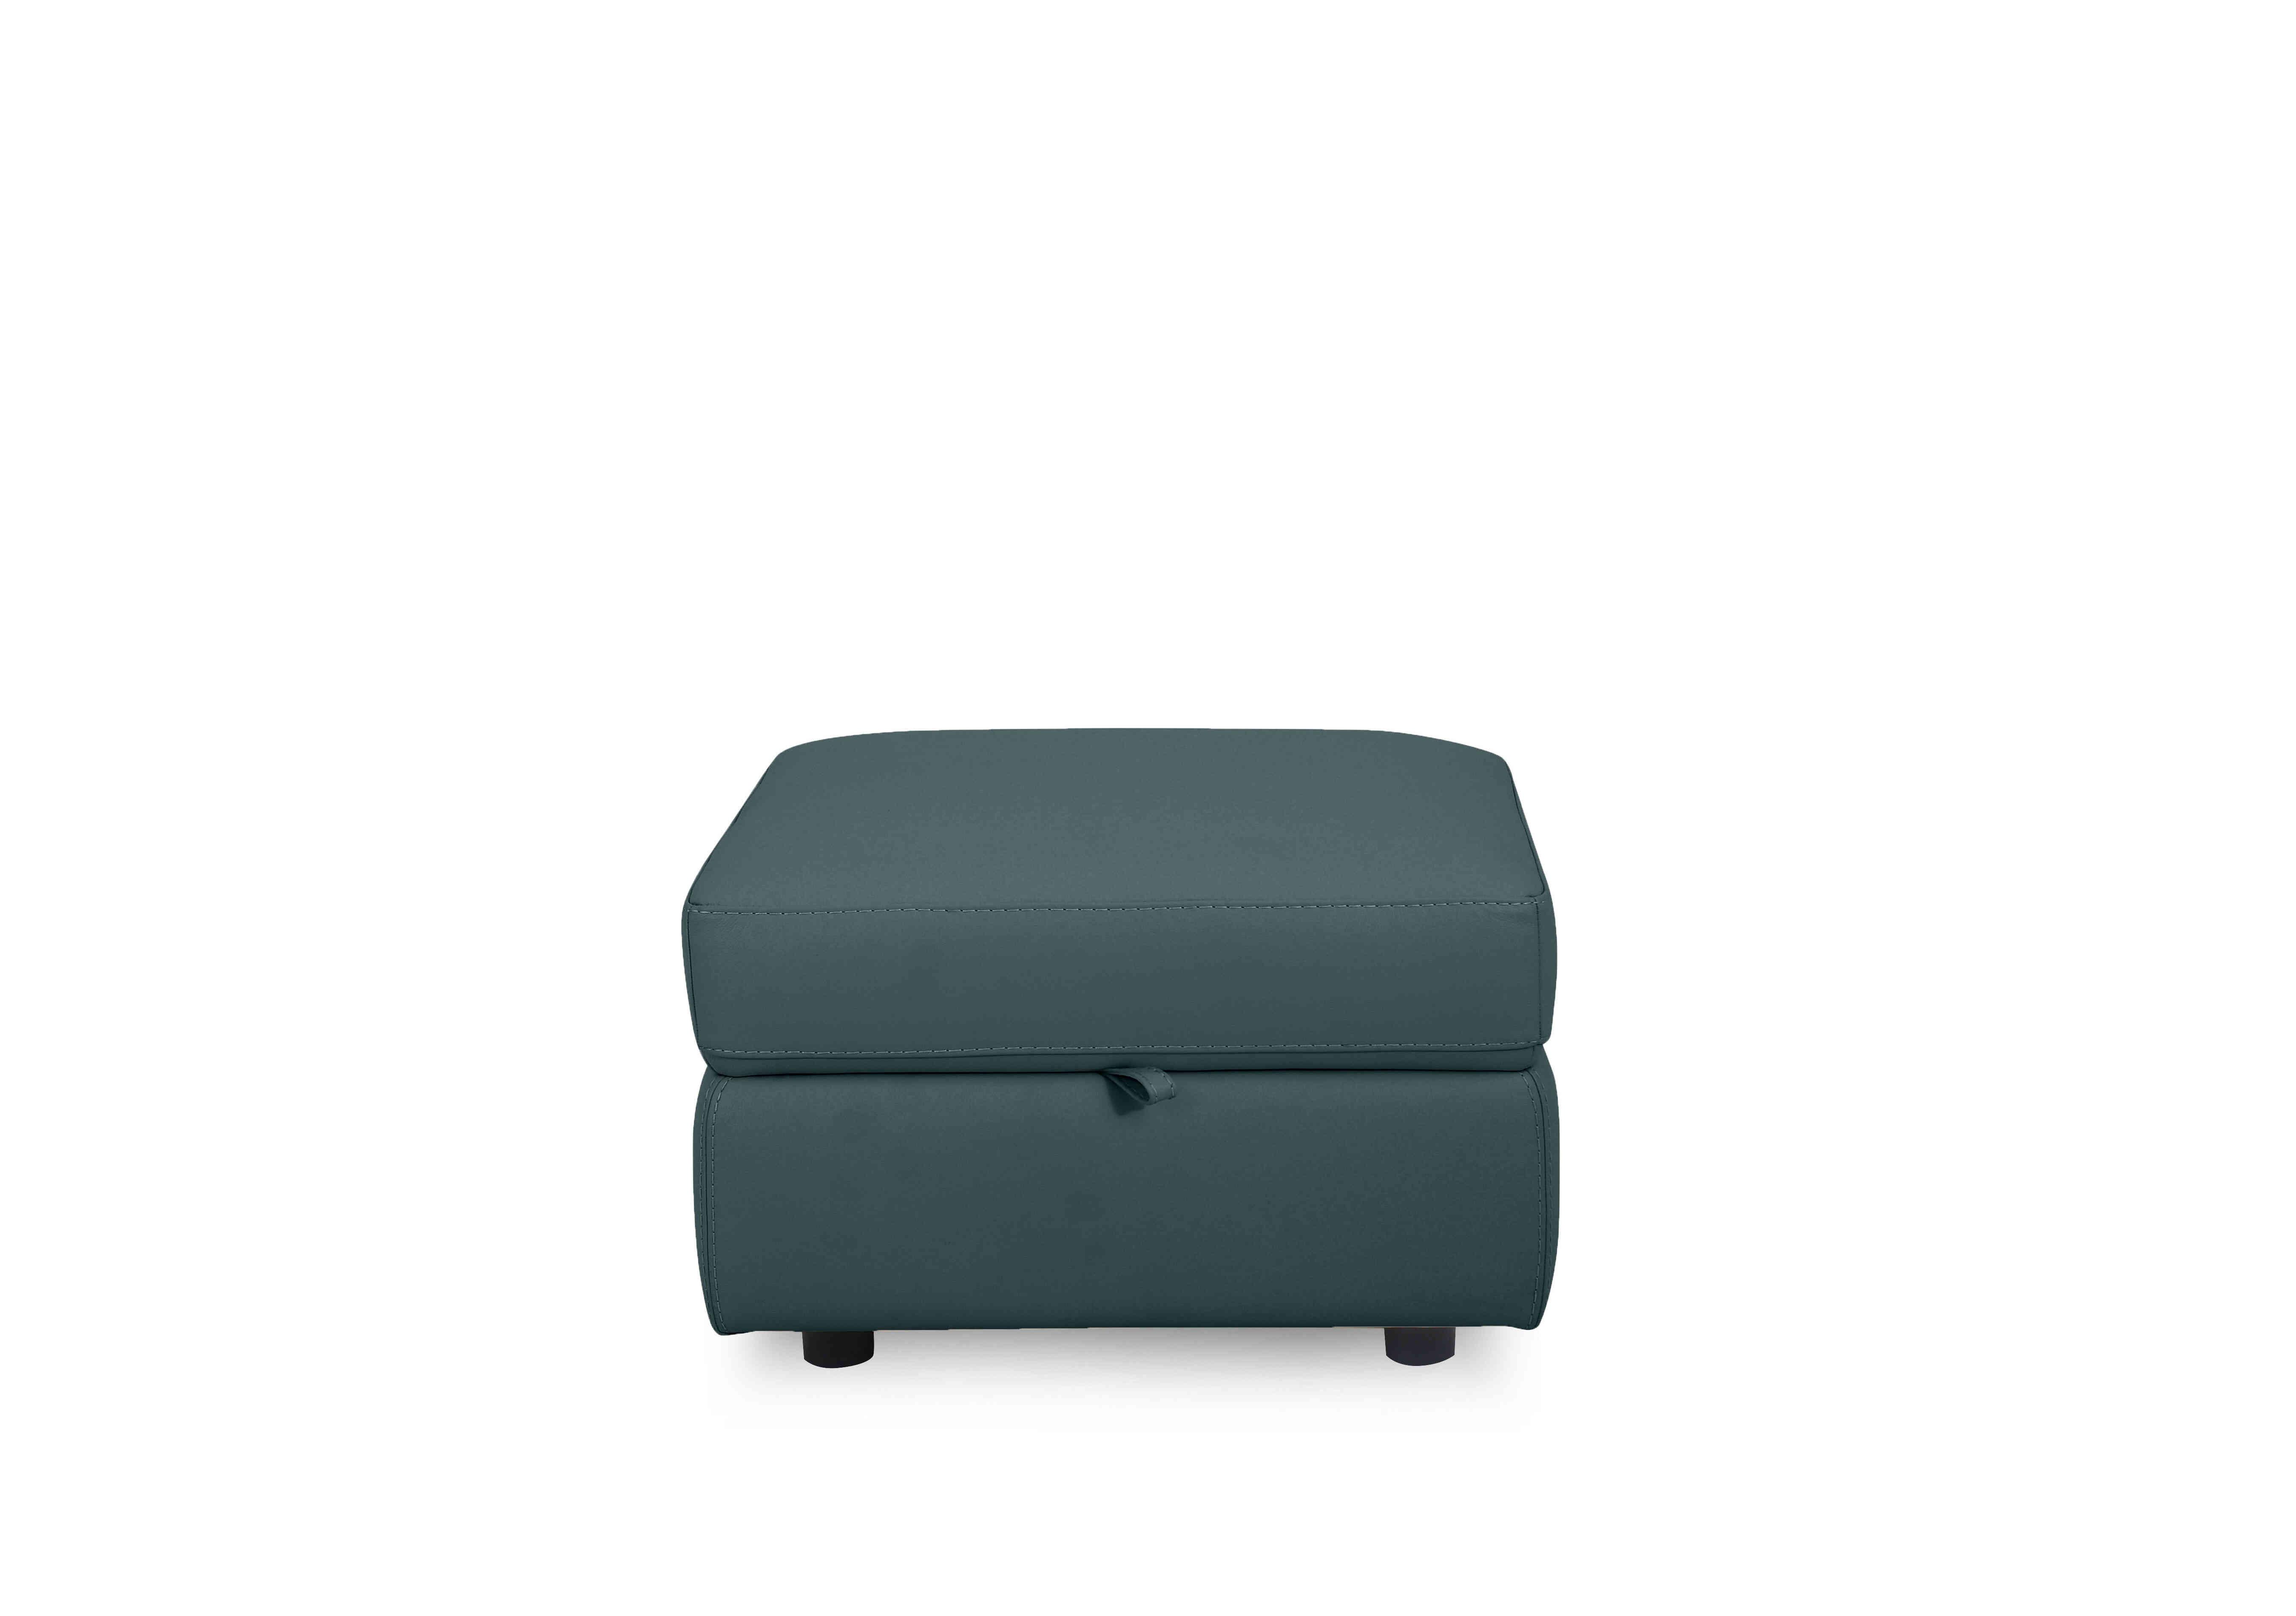 Compact Collection Lille Leather Storage Footstool in Bv-301e Lake Green on Furniture Village